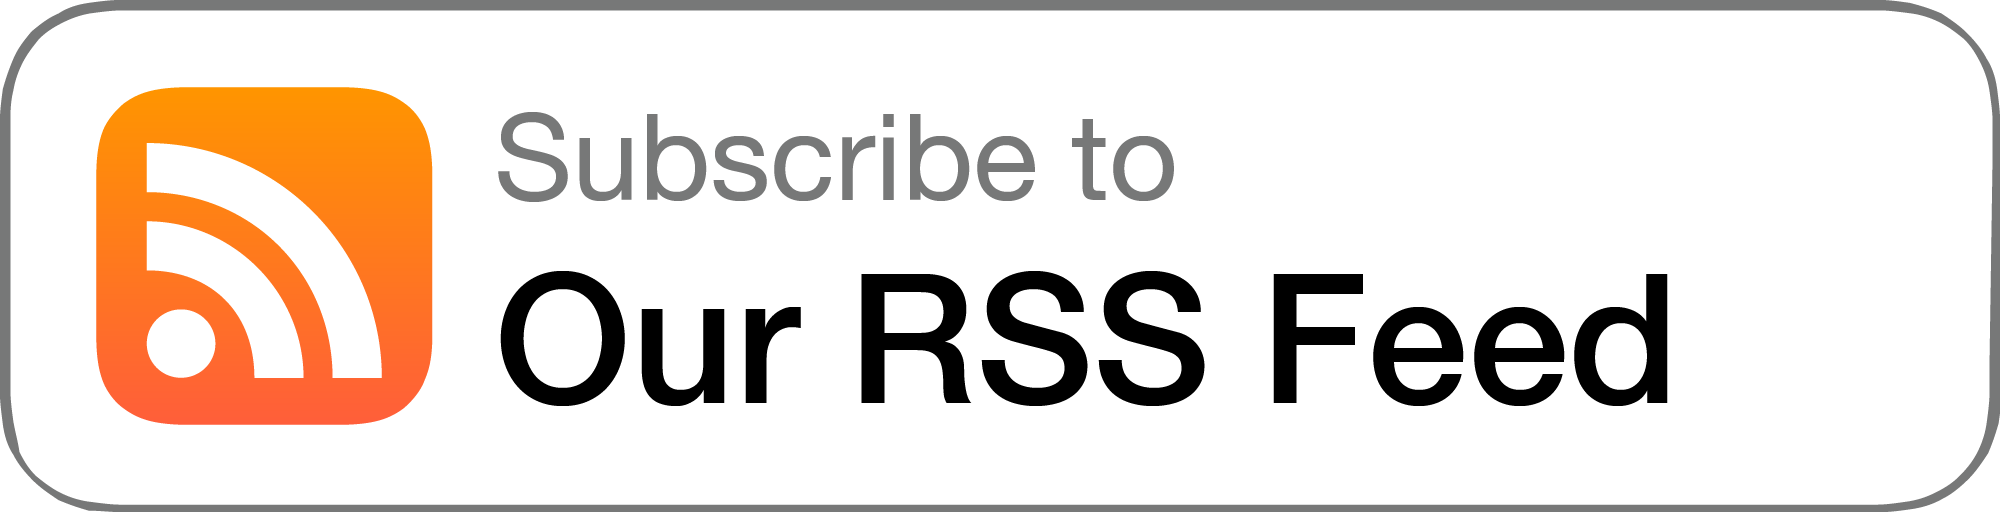 Subscribe to Forgotten Liberty Radio's RSS feed